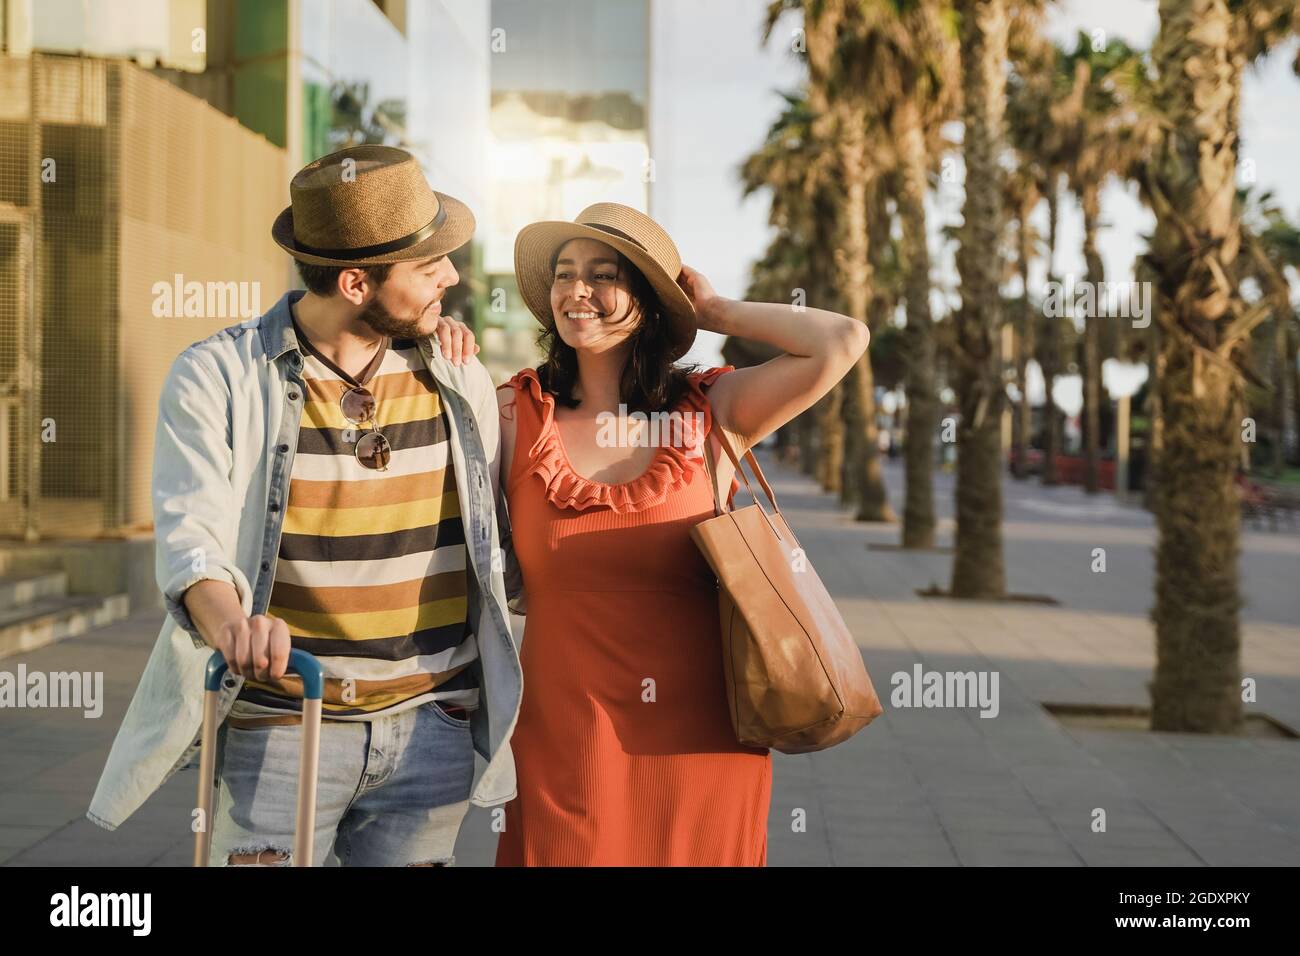 Young couple having fun outside airport with suitcase to celebrate their honeymoon - Focus on girl face Stock Photo